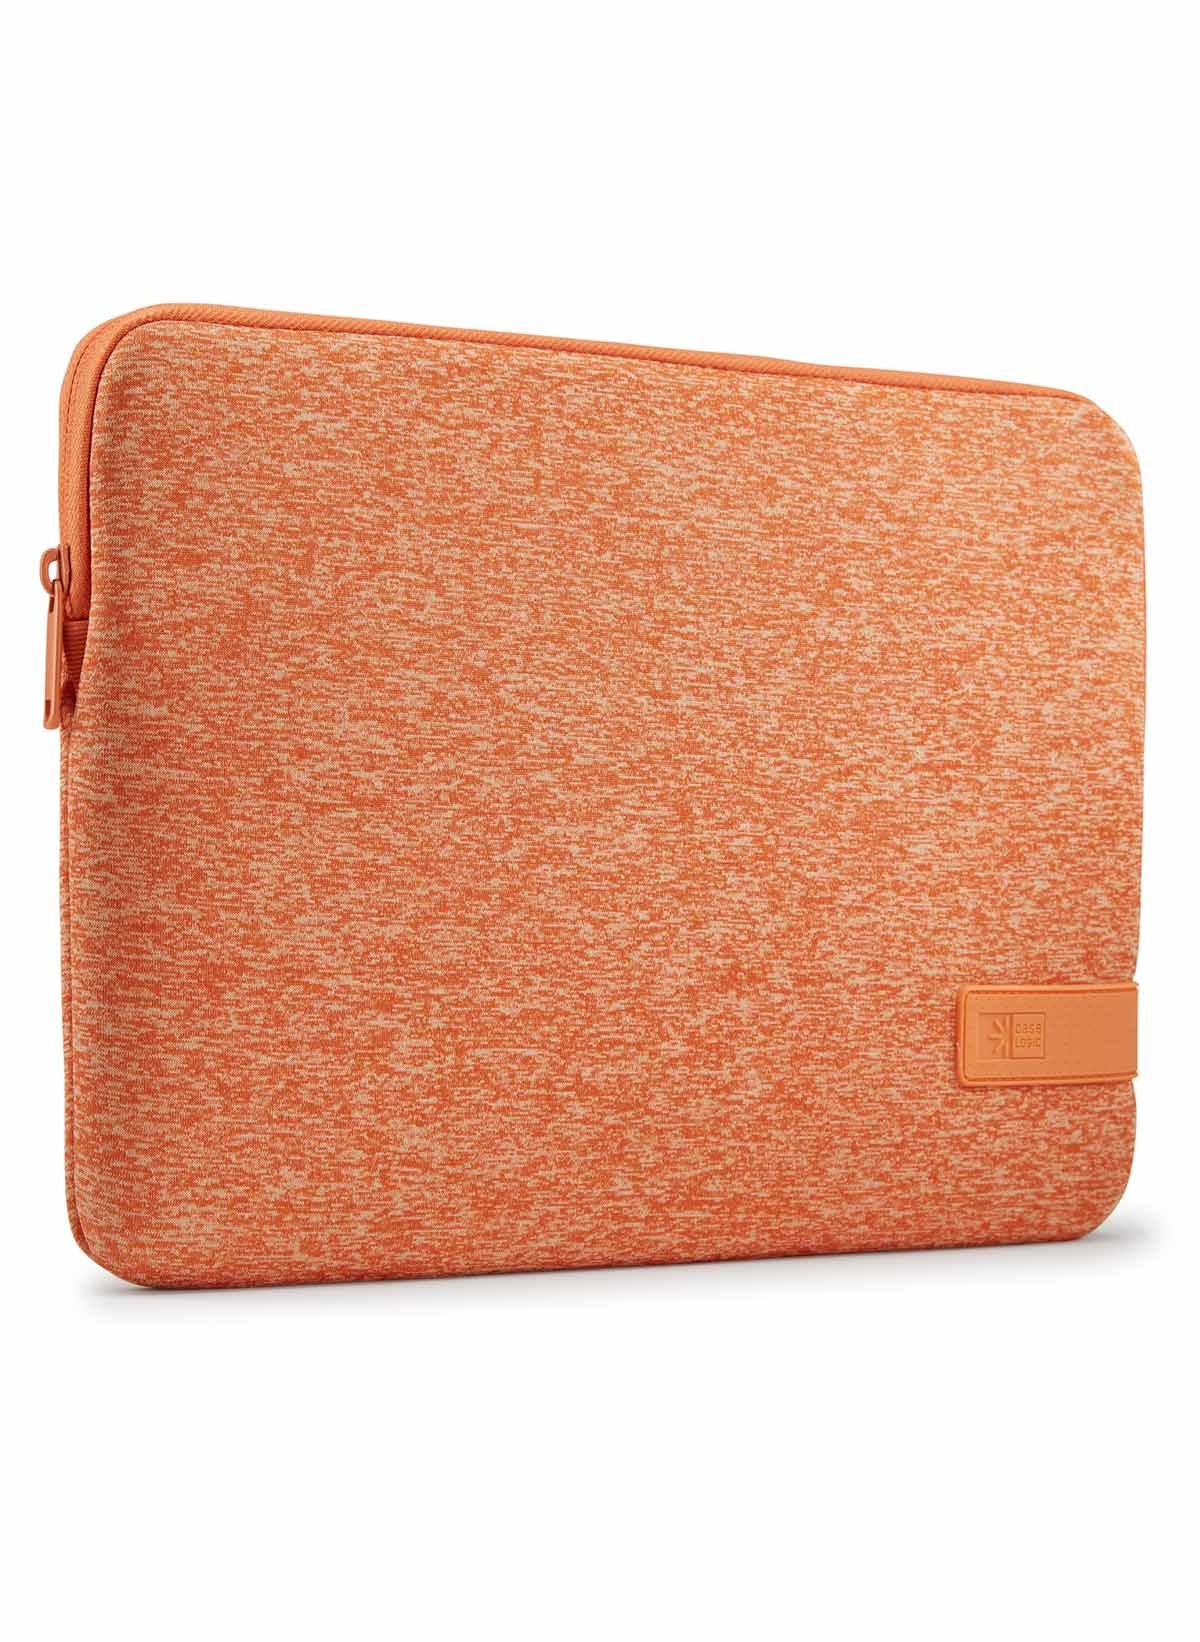 Coral LOGIC Notebook Universal Reflect Sleeve Sleeve Polyester, für CASE Gold/Apricot